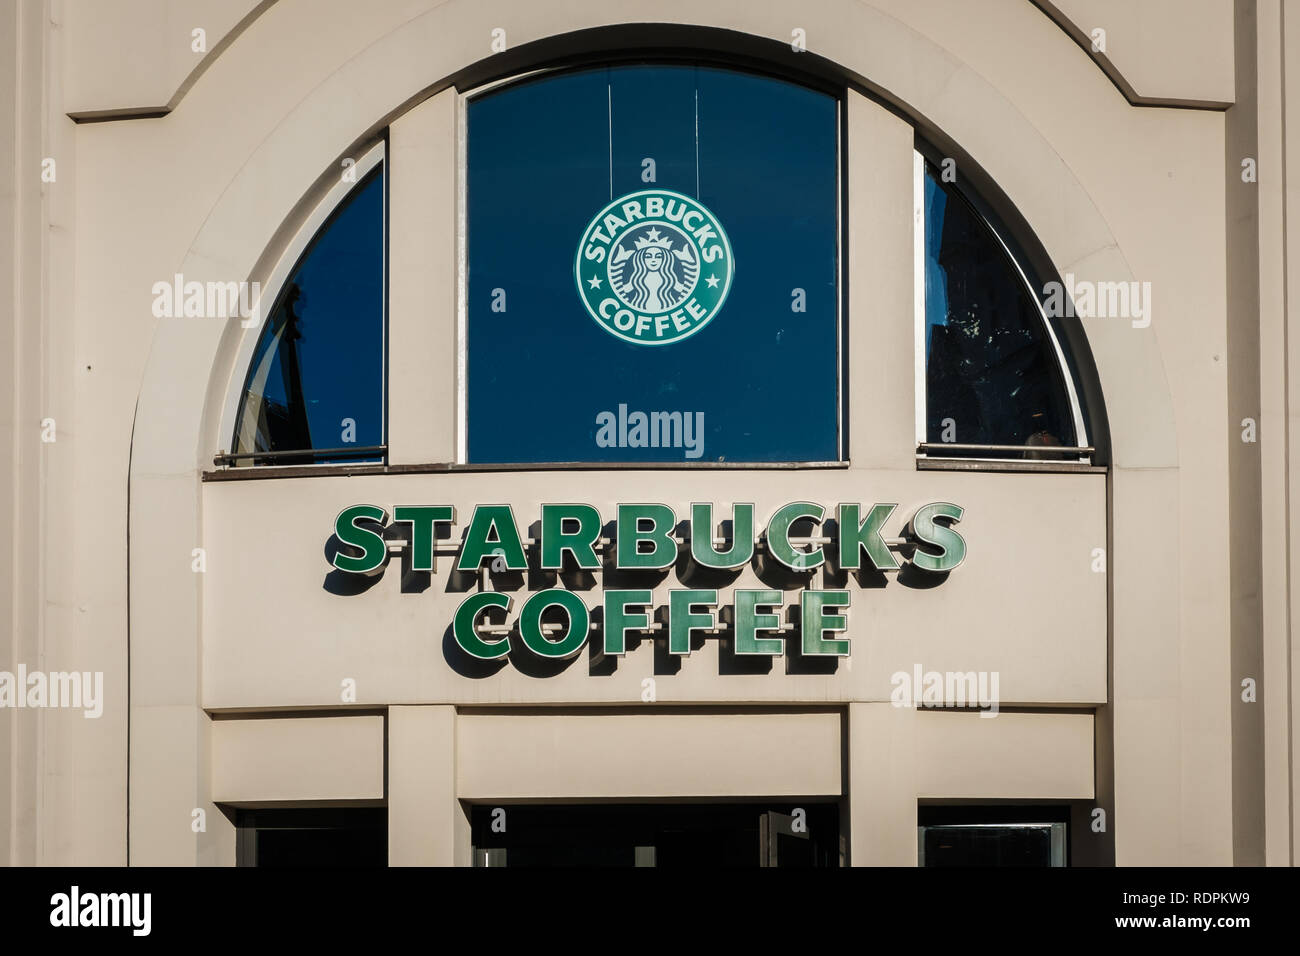 Berlin, Germany - january 2019:   Starbucks coffee logo and brand name on Cafe facade  in Berlin, Germany, Stock Photo